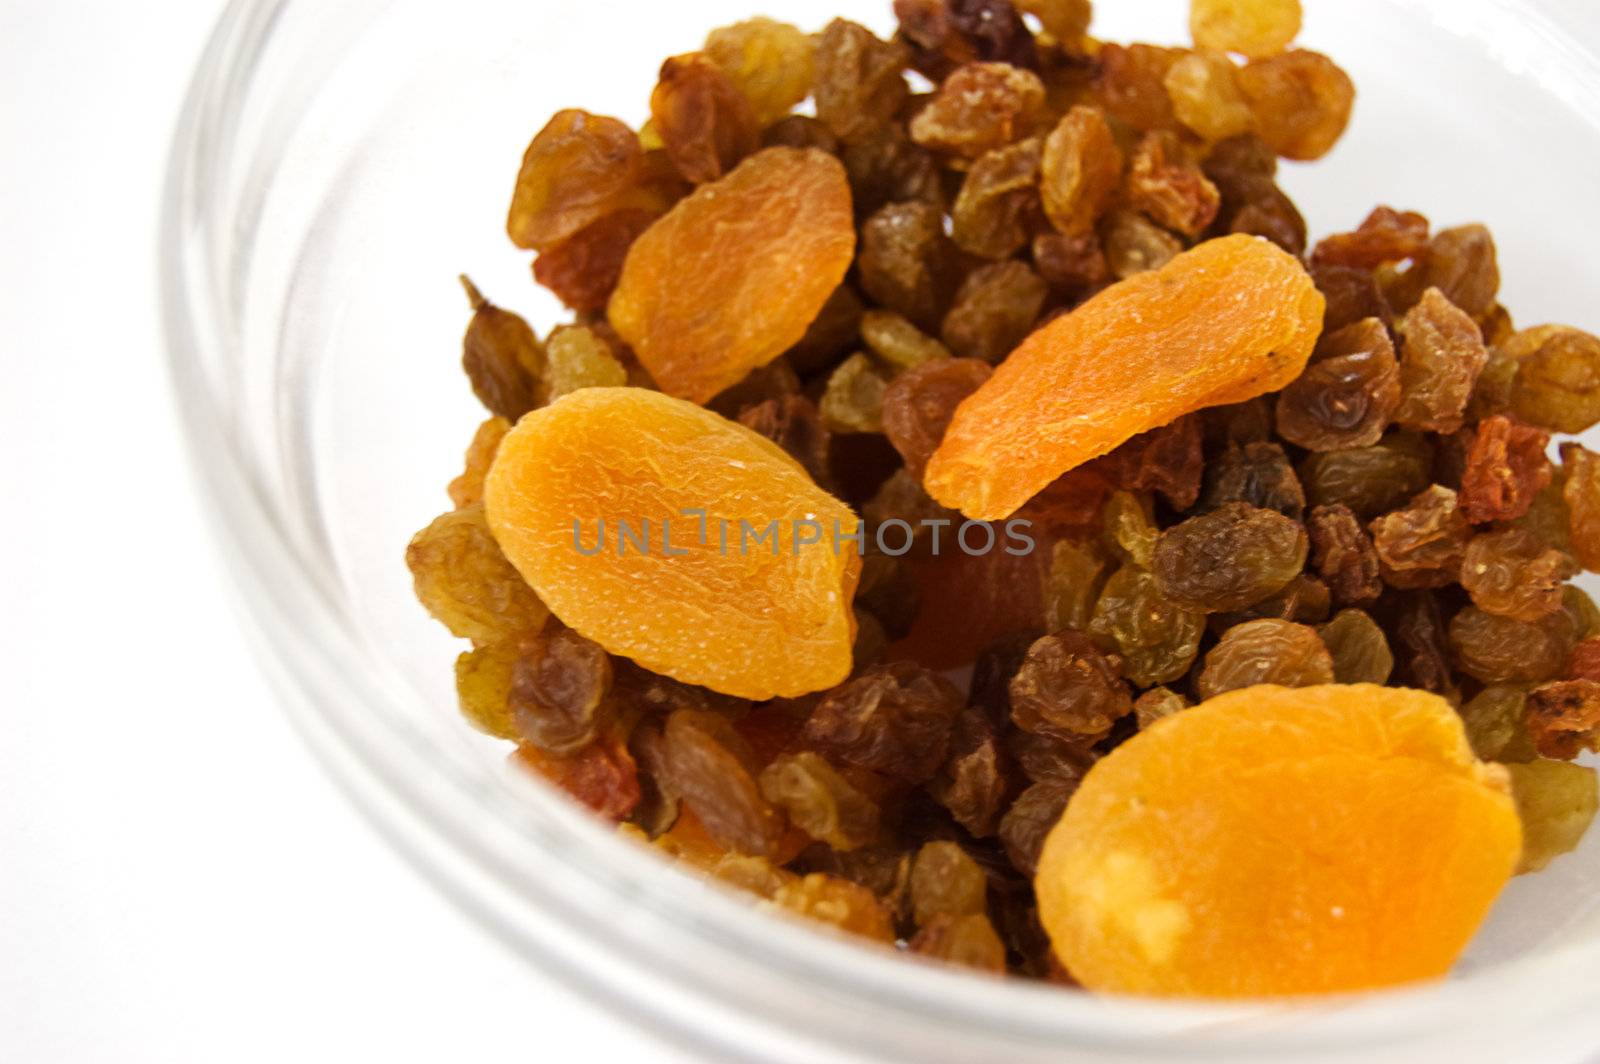 Dried apricots and raisins by Angel_a